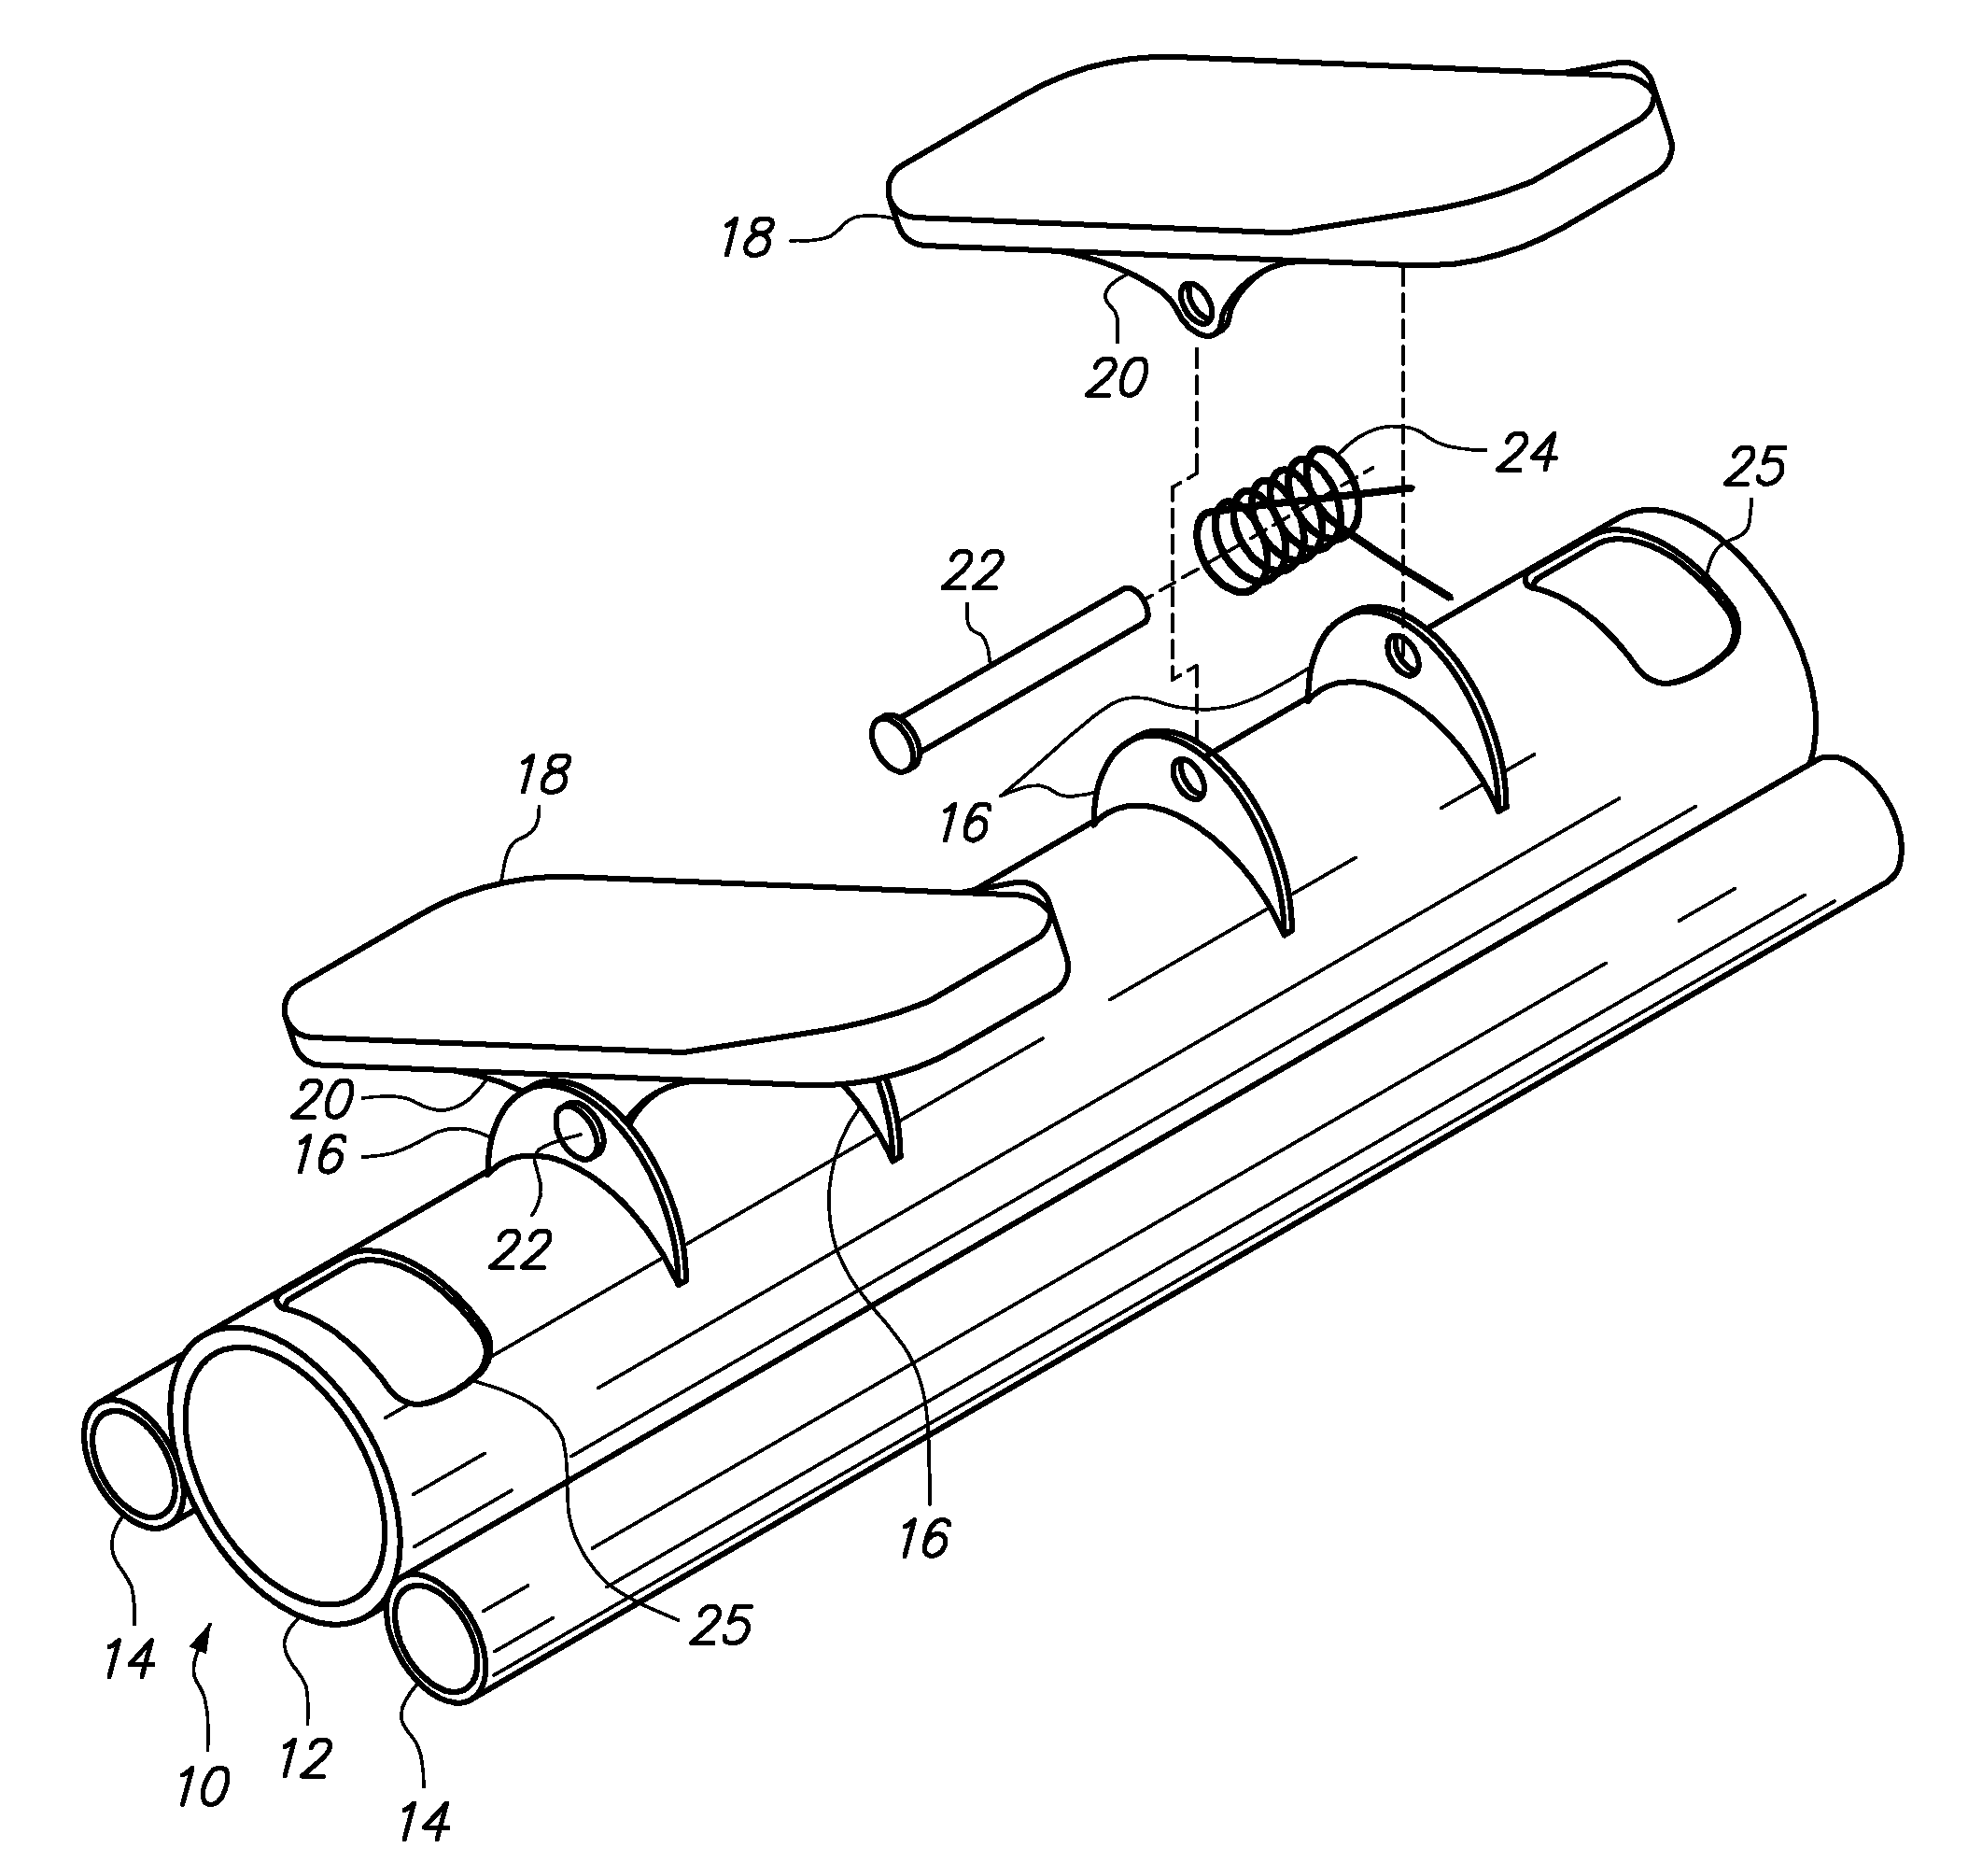 Exercise device with footboards having tubular support